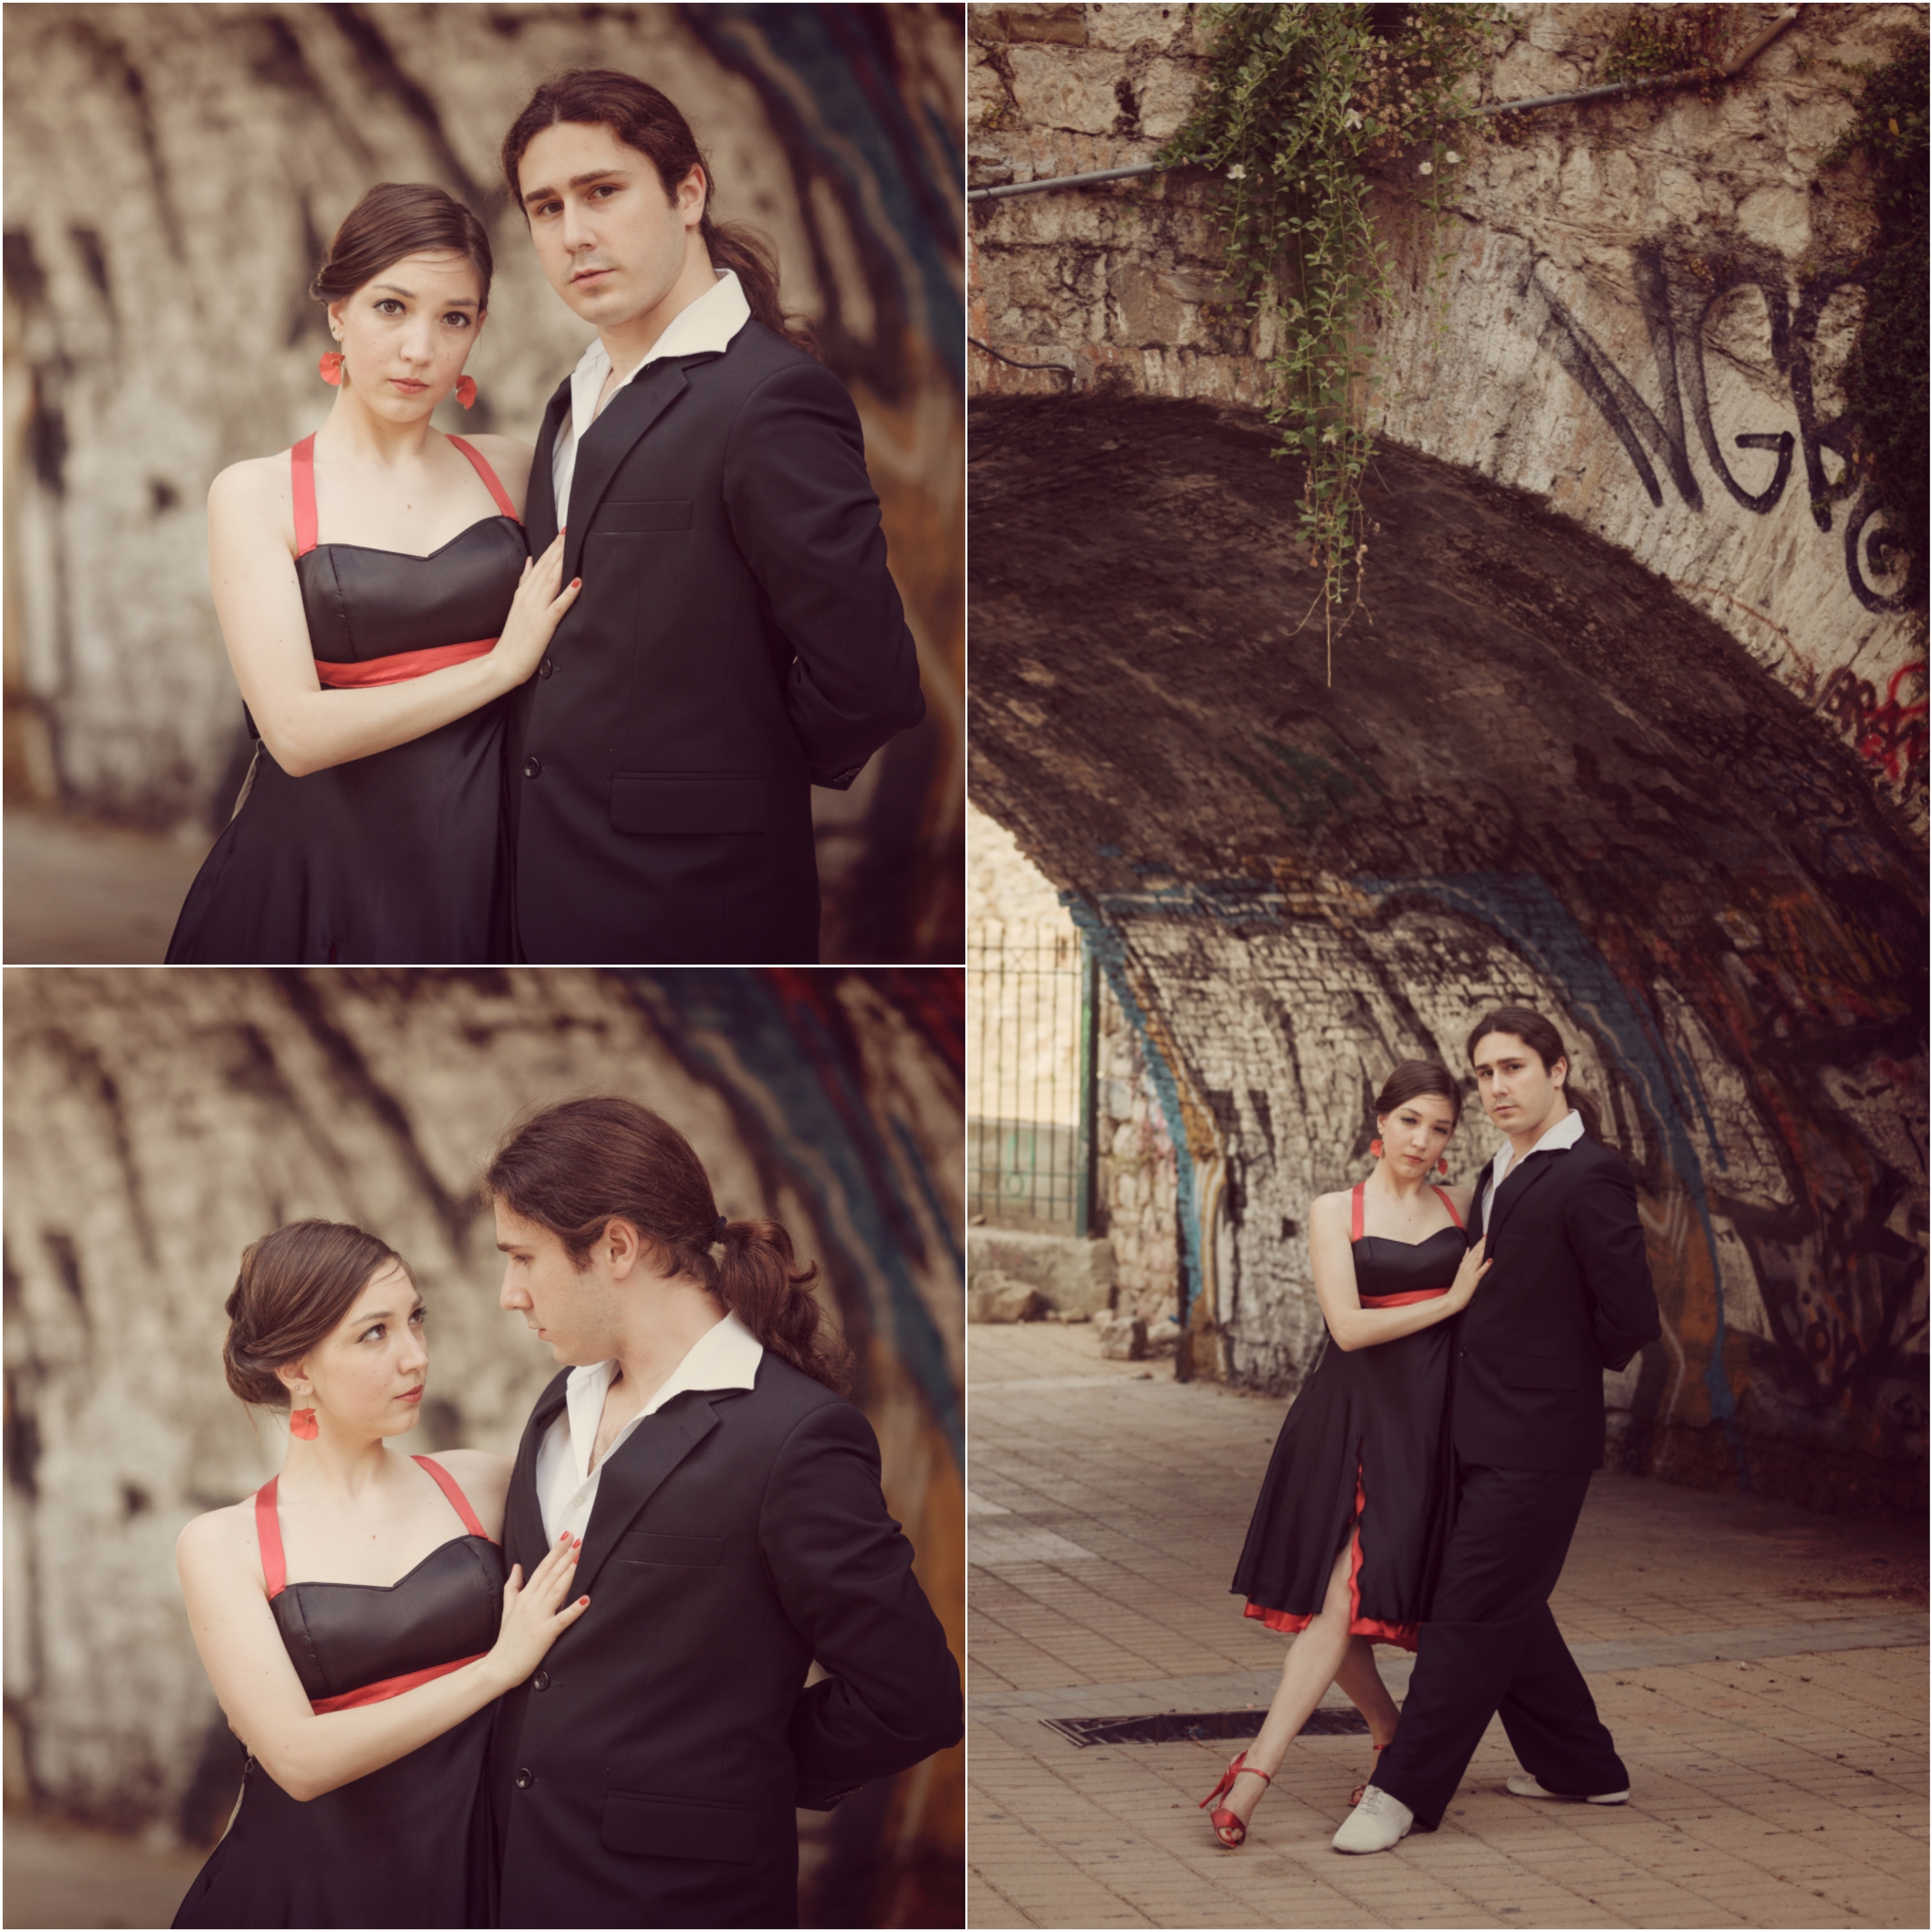 ANDRIOPOULOS_PHOTOGRAPHY TANGO 1.jpg